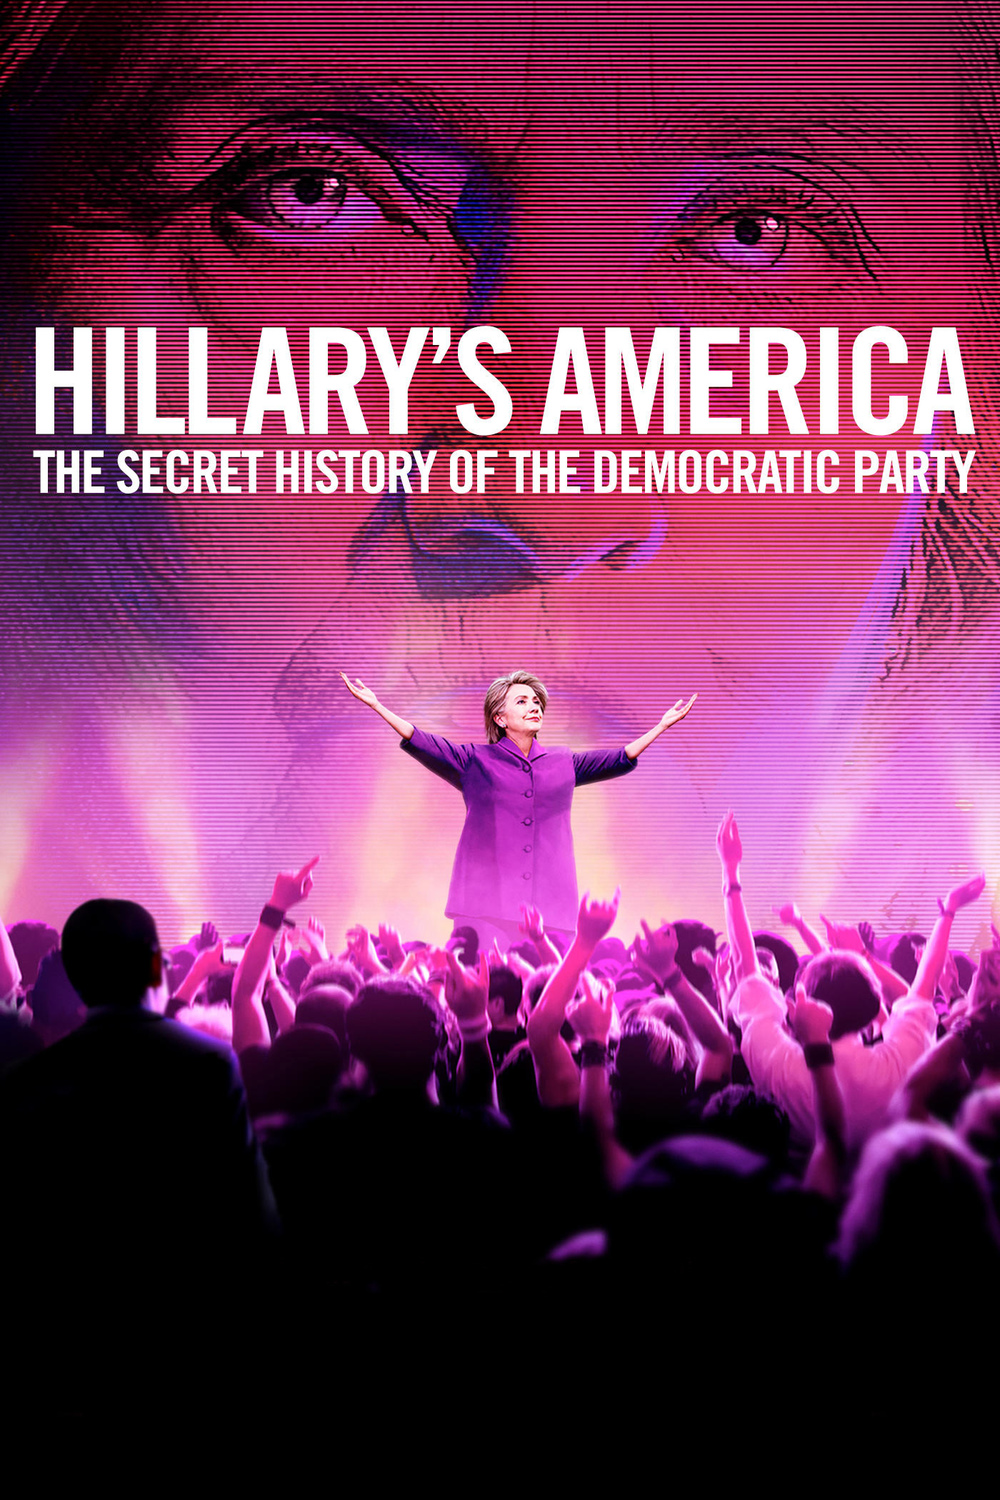 affiche du film Hillary's America: The Secret History of the Democratic Party